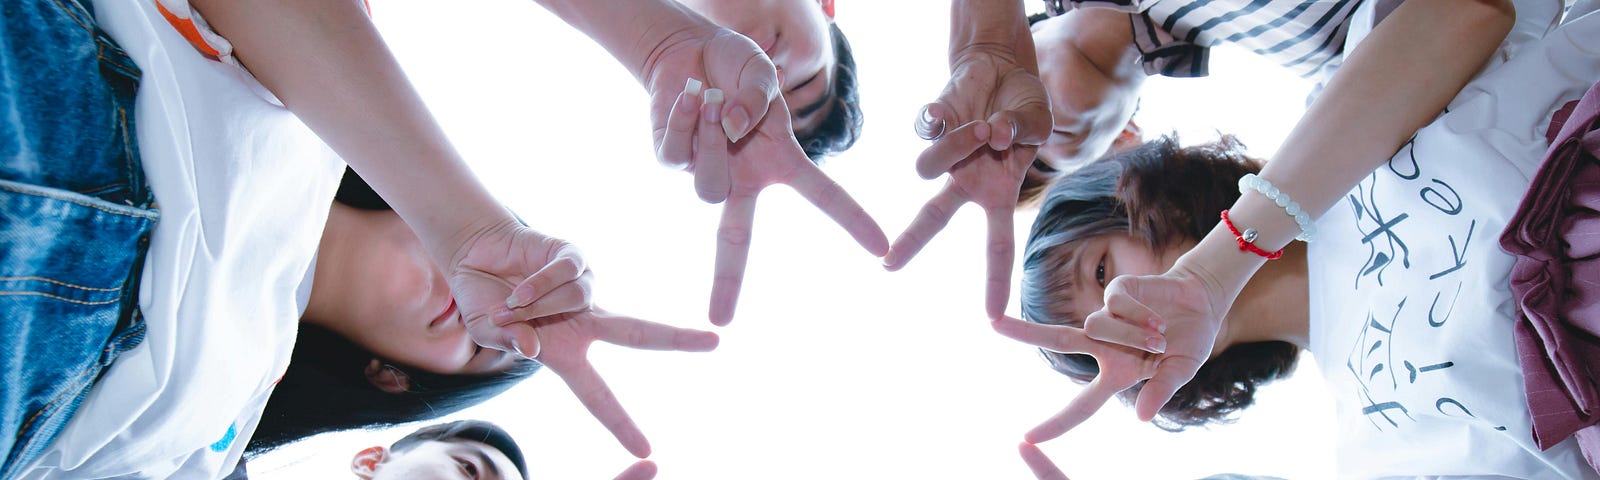 Group of people forming a star with their fingers